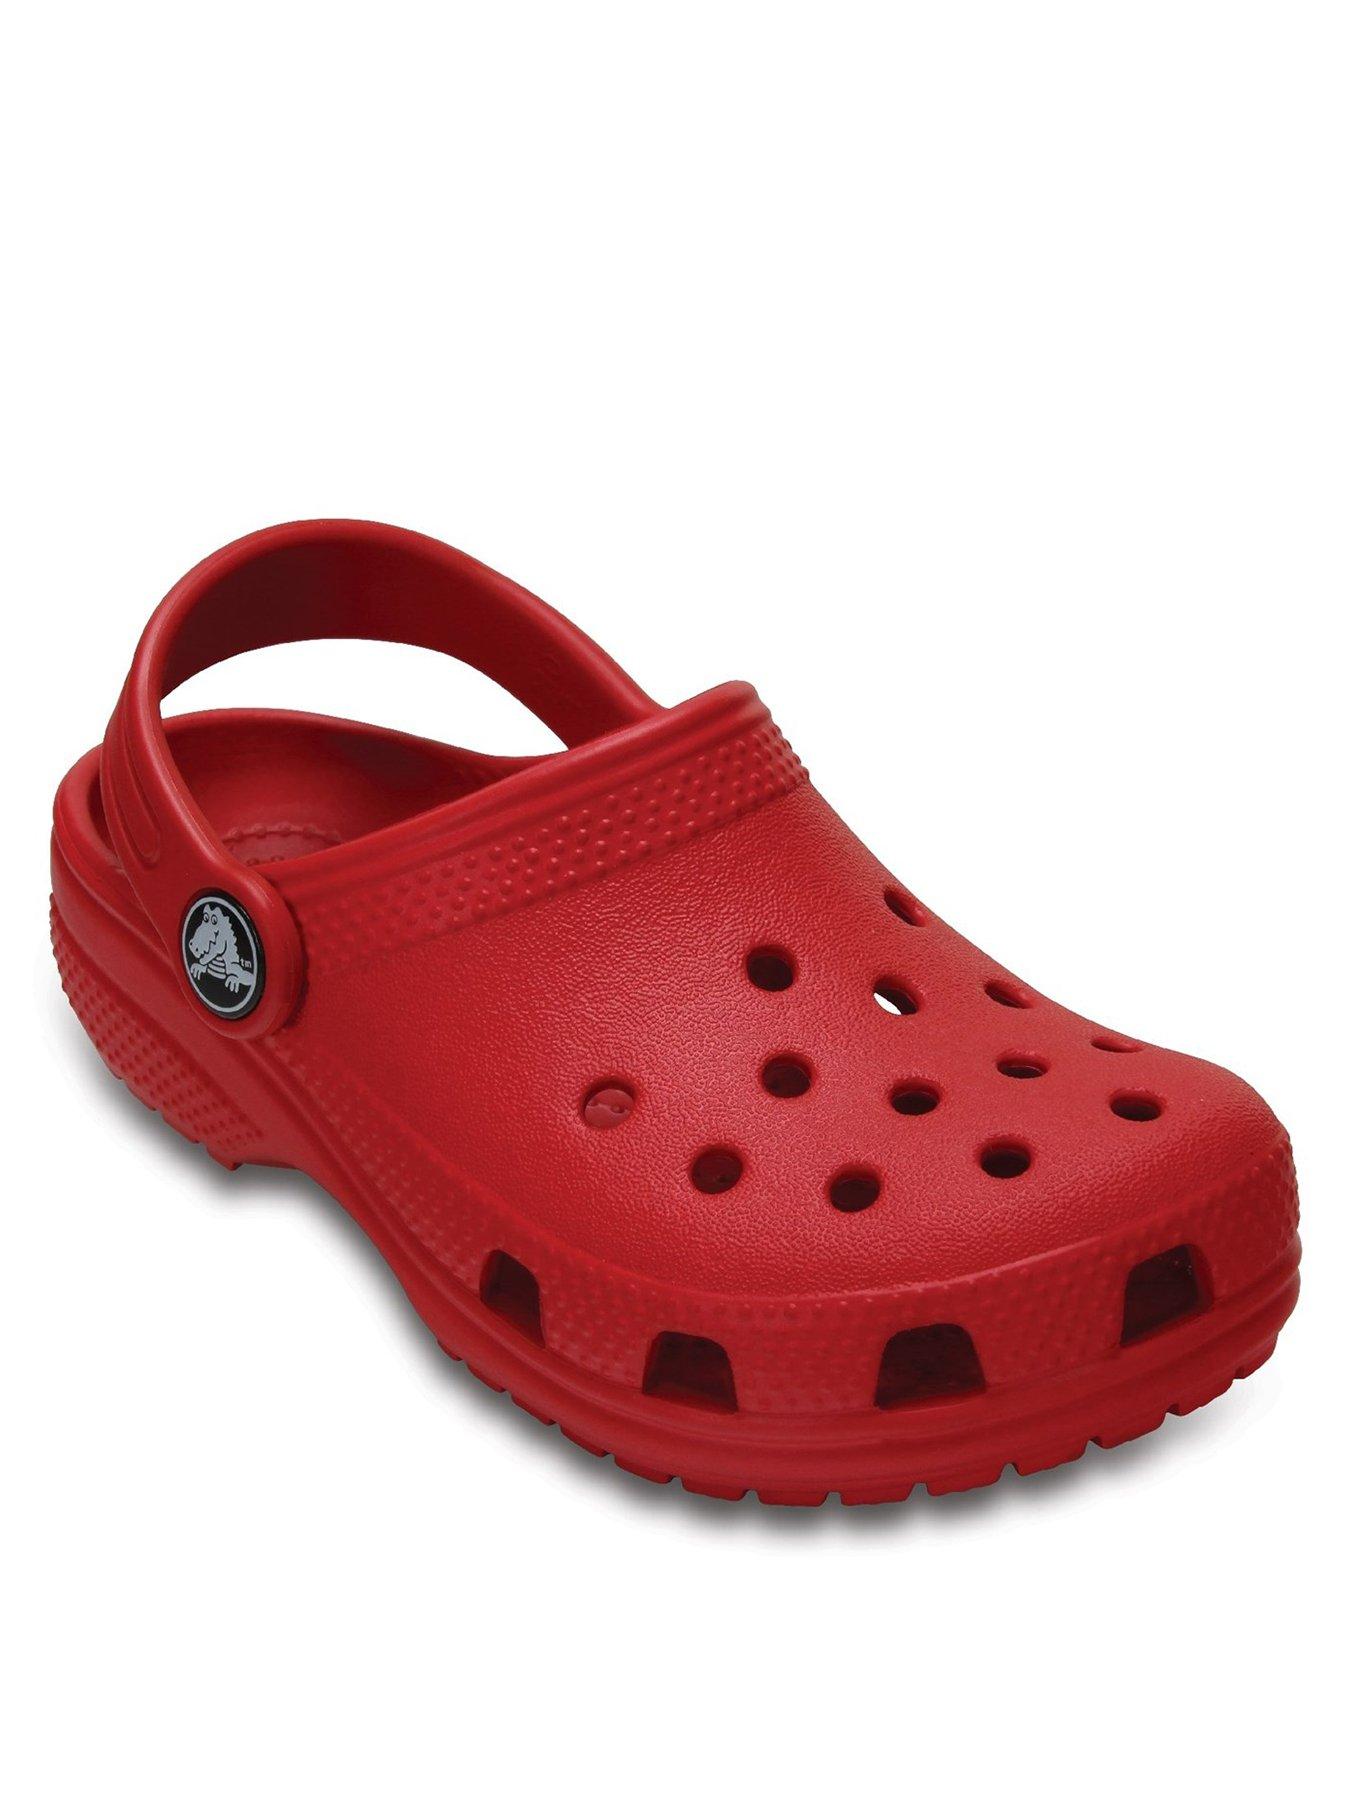 white crocs without holes